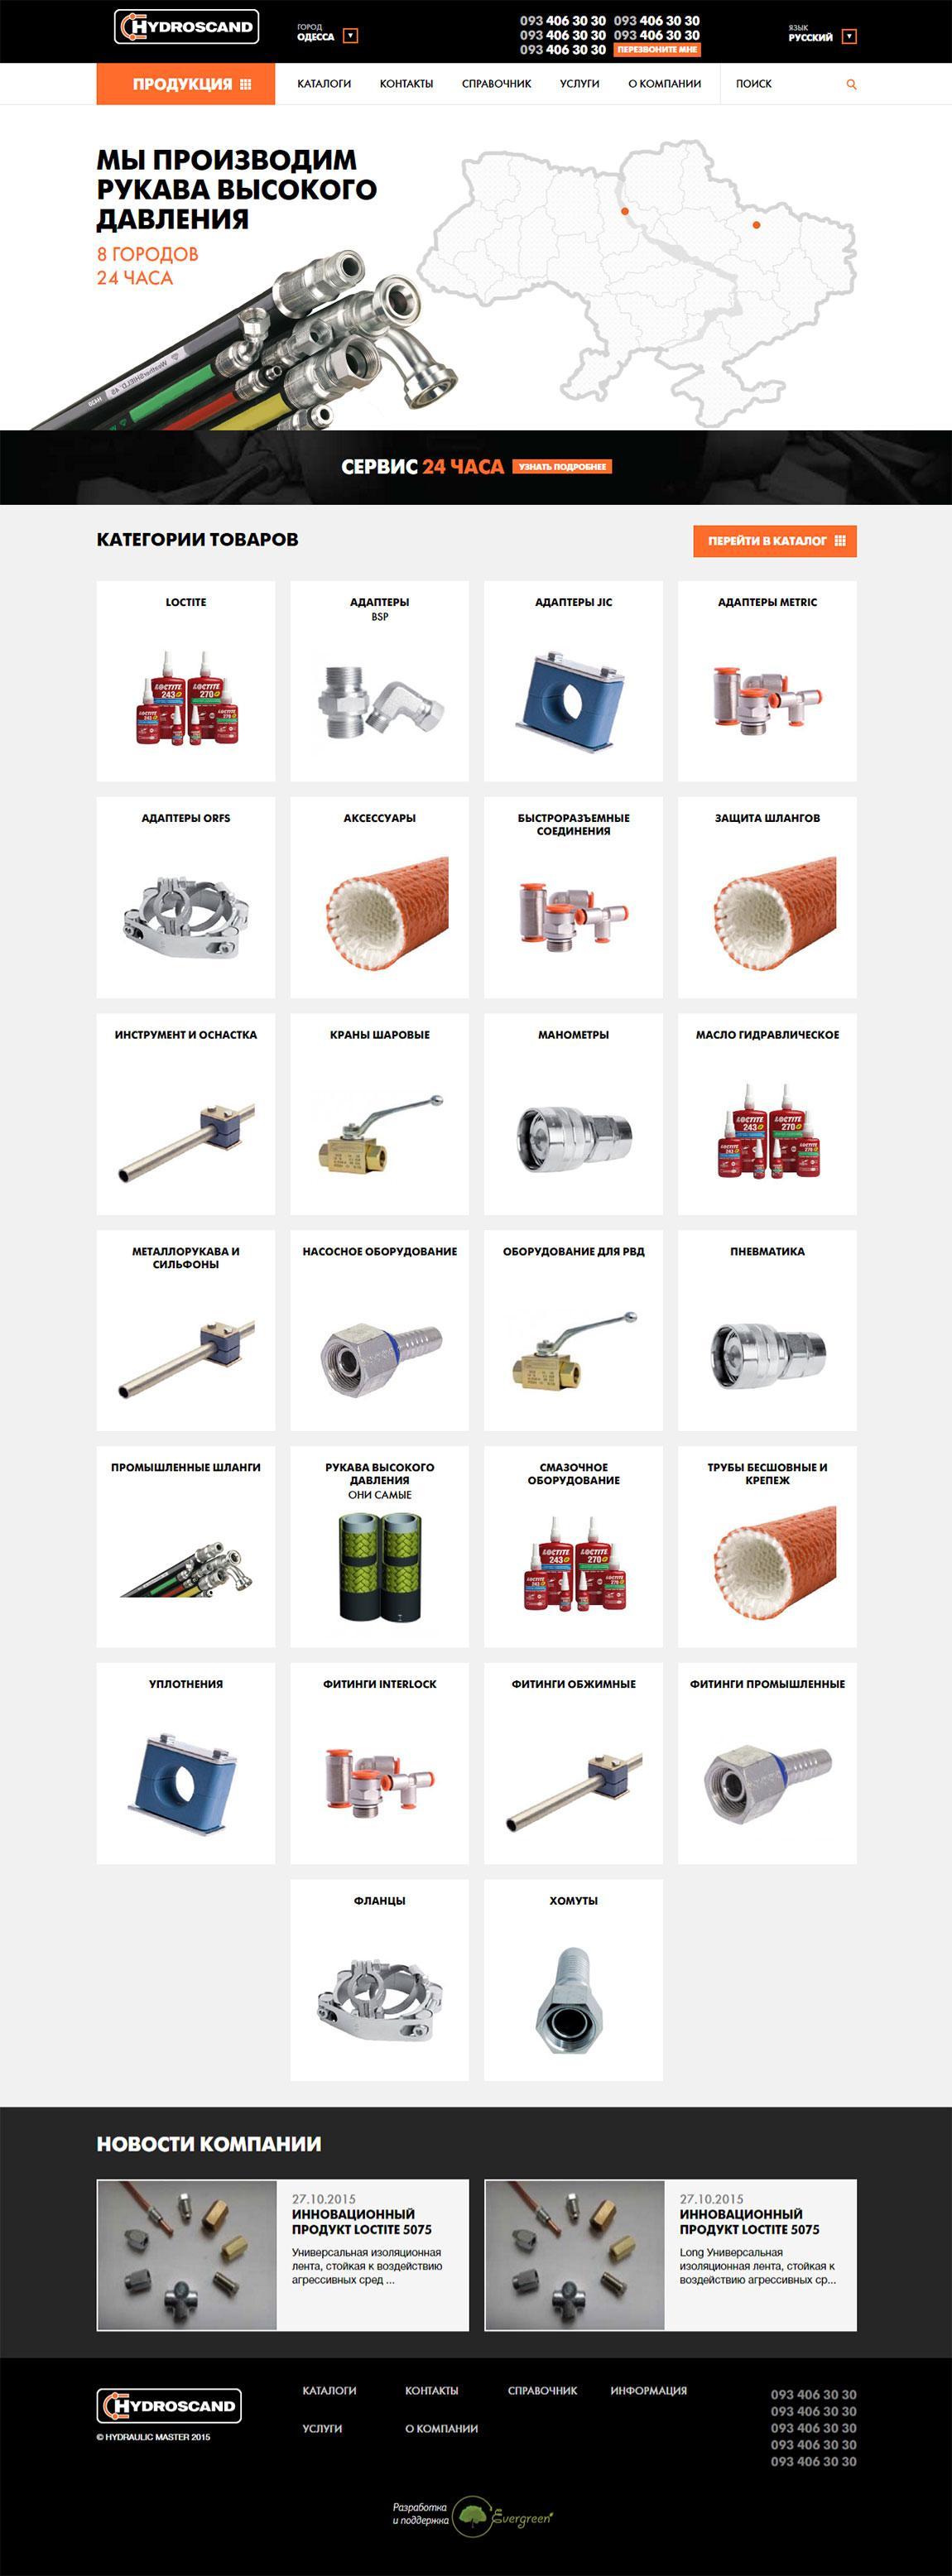 online-catalogue for hydraulic parts, hoses, and other parts for machines and engines | Evergreen projects 11